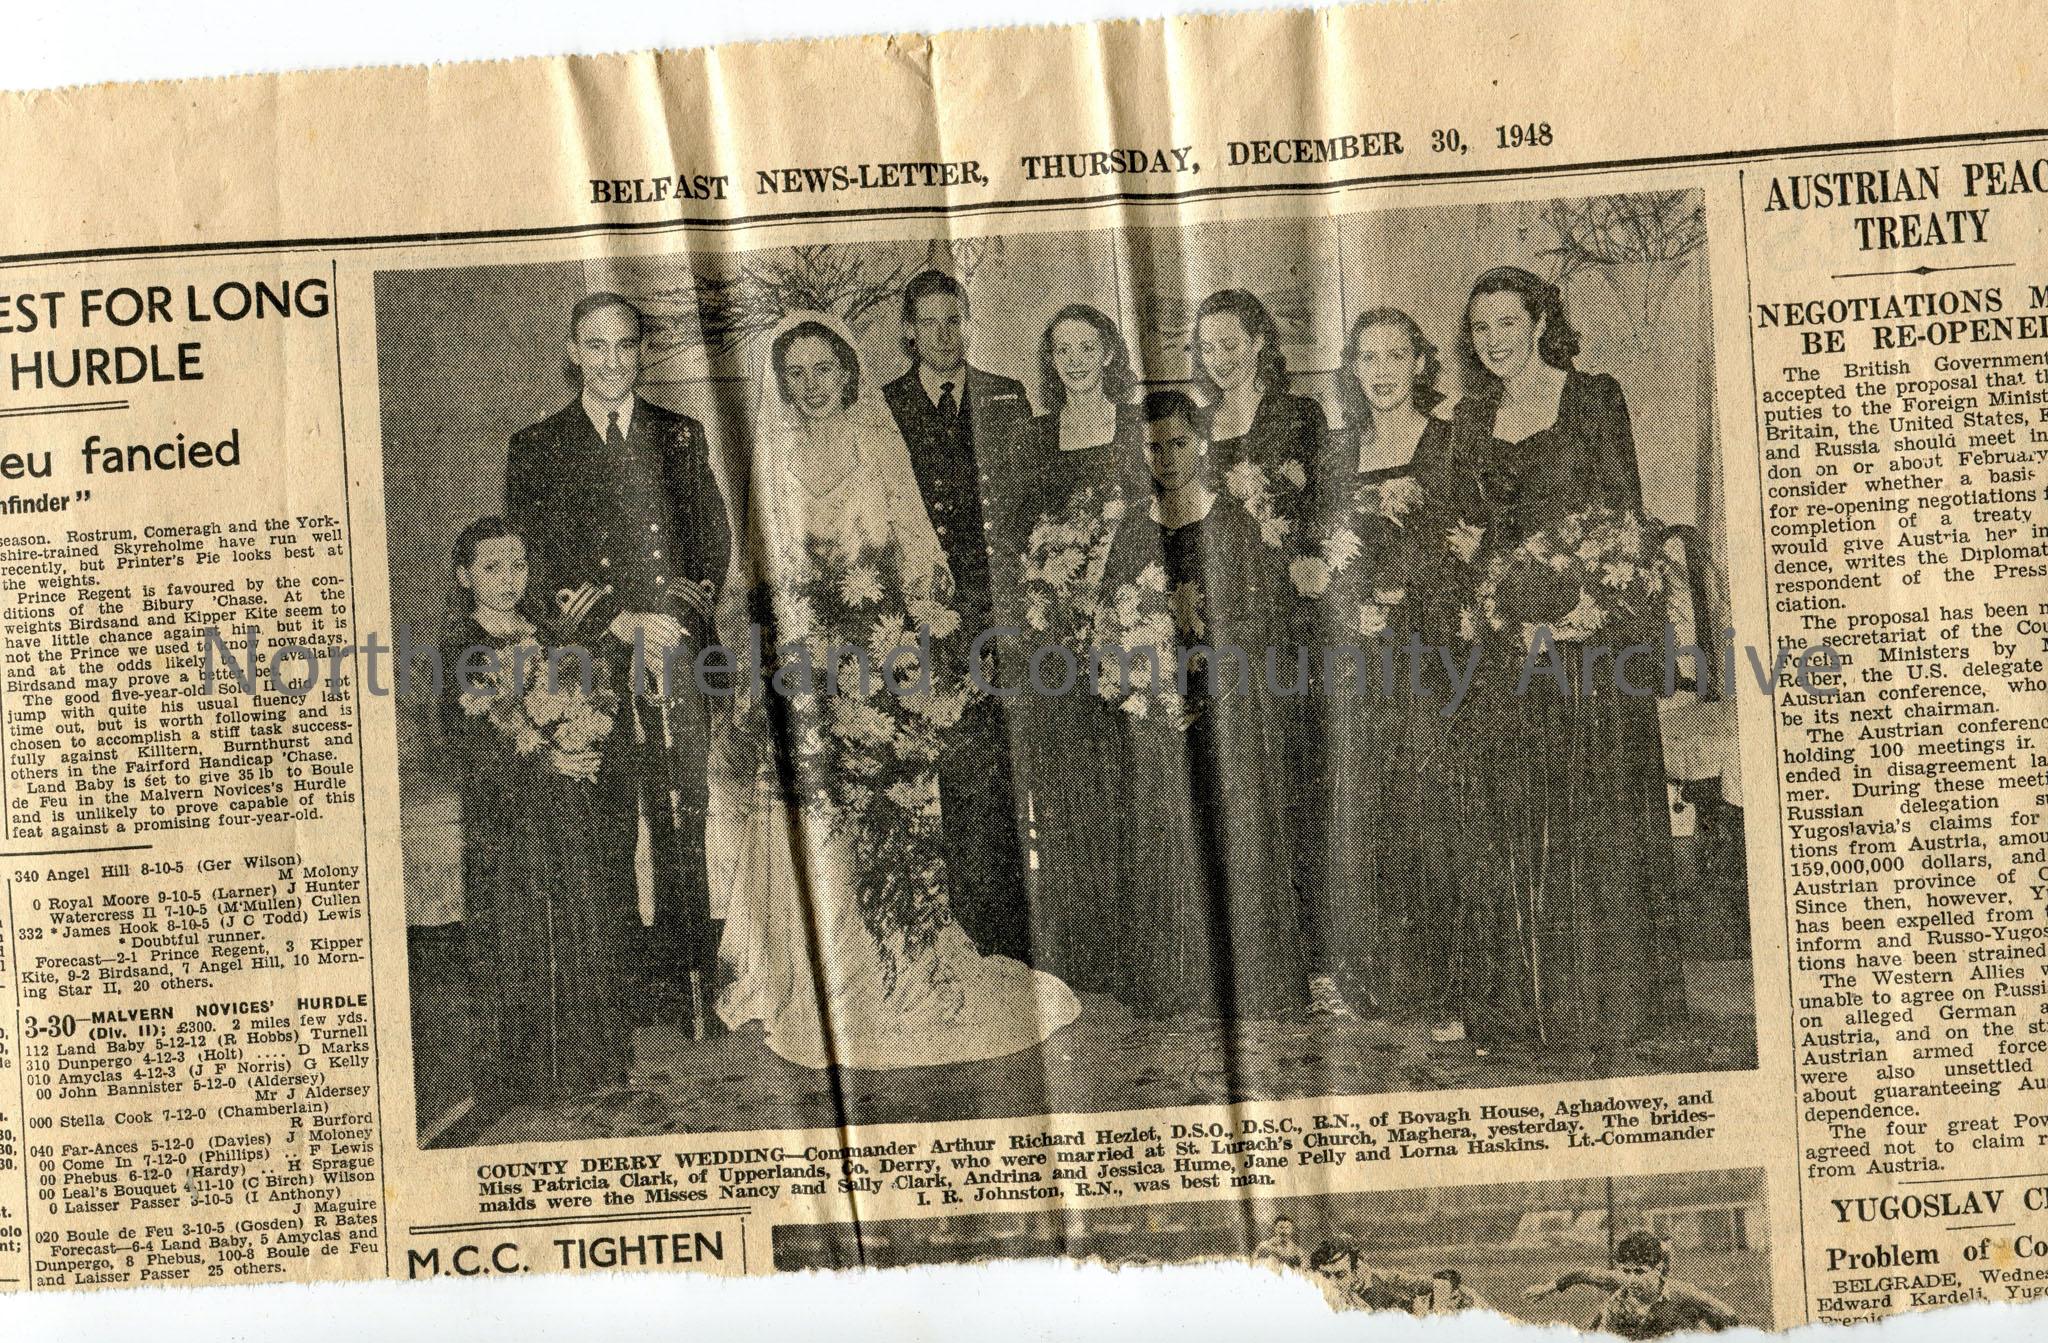 Newspaper cutting from the Belfast News-Letter, Thursday, December 30, 1948. Image of a wedding party captioned, “County Derry Wedding”. Marriage betw…